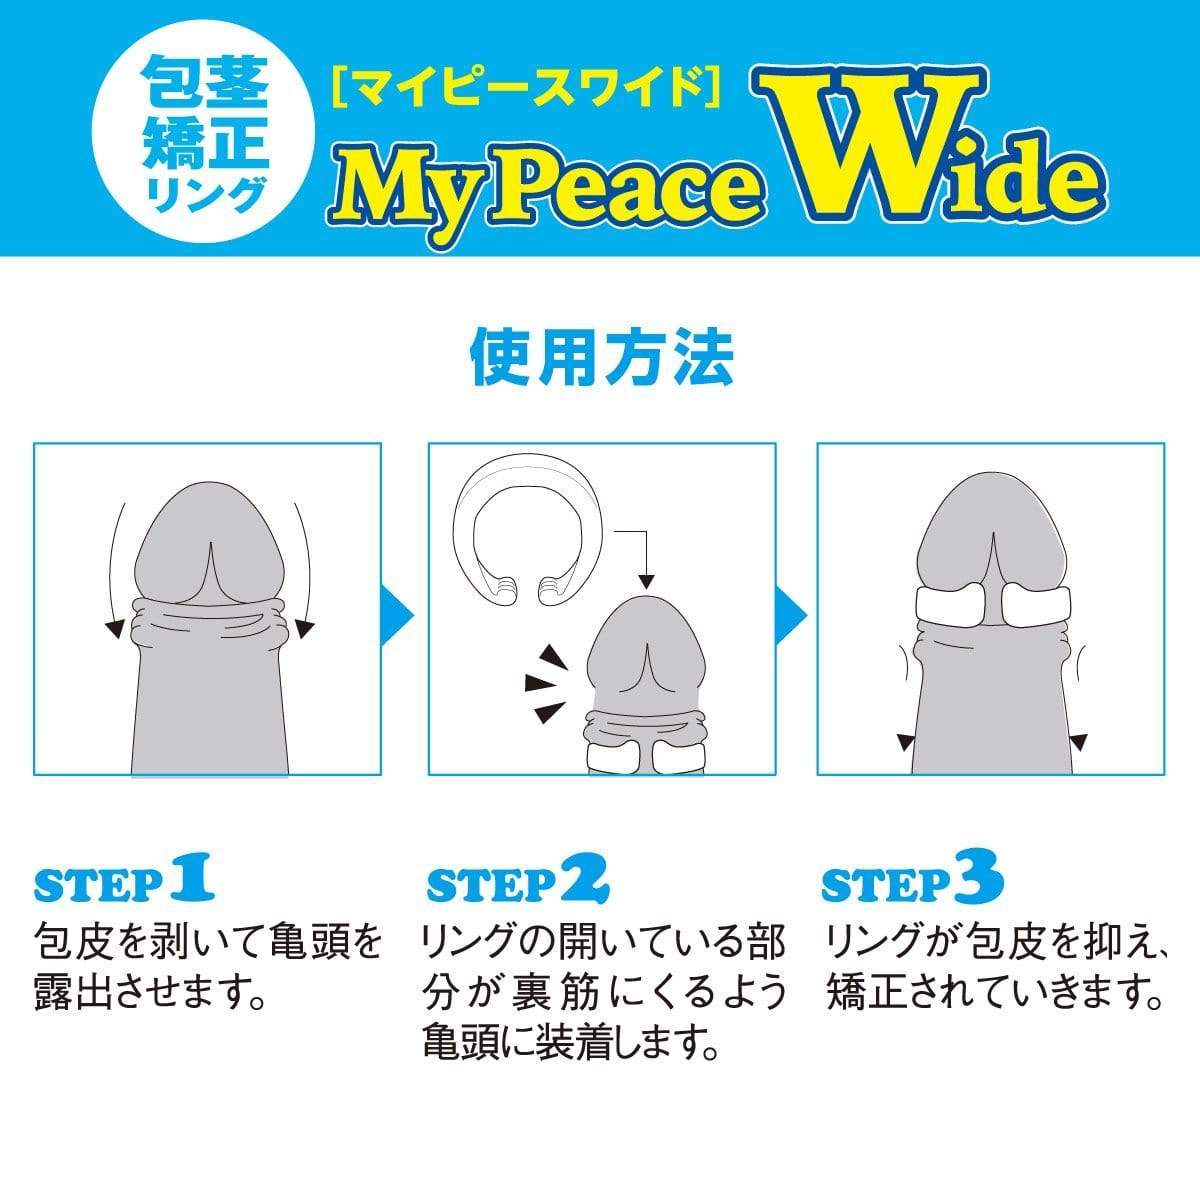 SSI Japan - My Peace Wide Soft Night Size M Correction Cock Ring (Clear) -  Cock Ring (Non Vibration)  Durio.sg